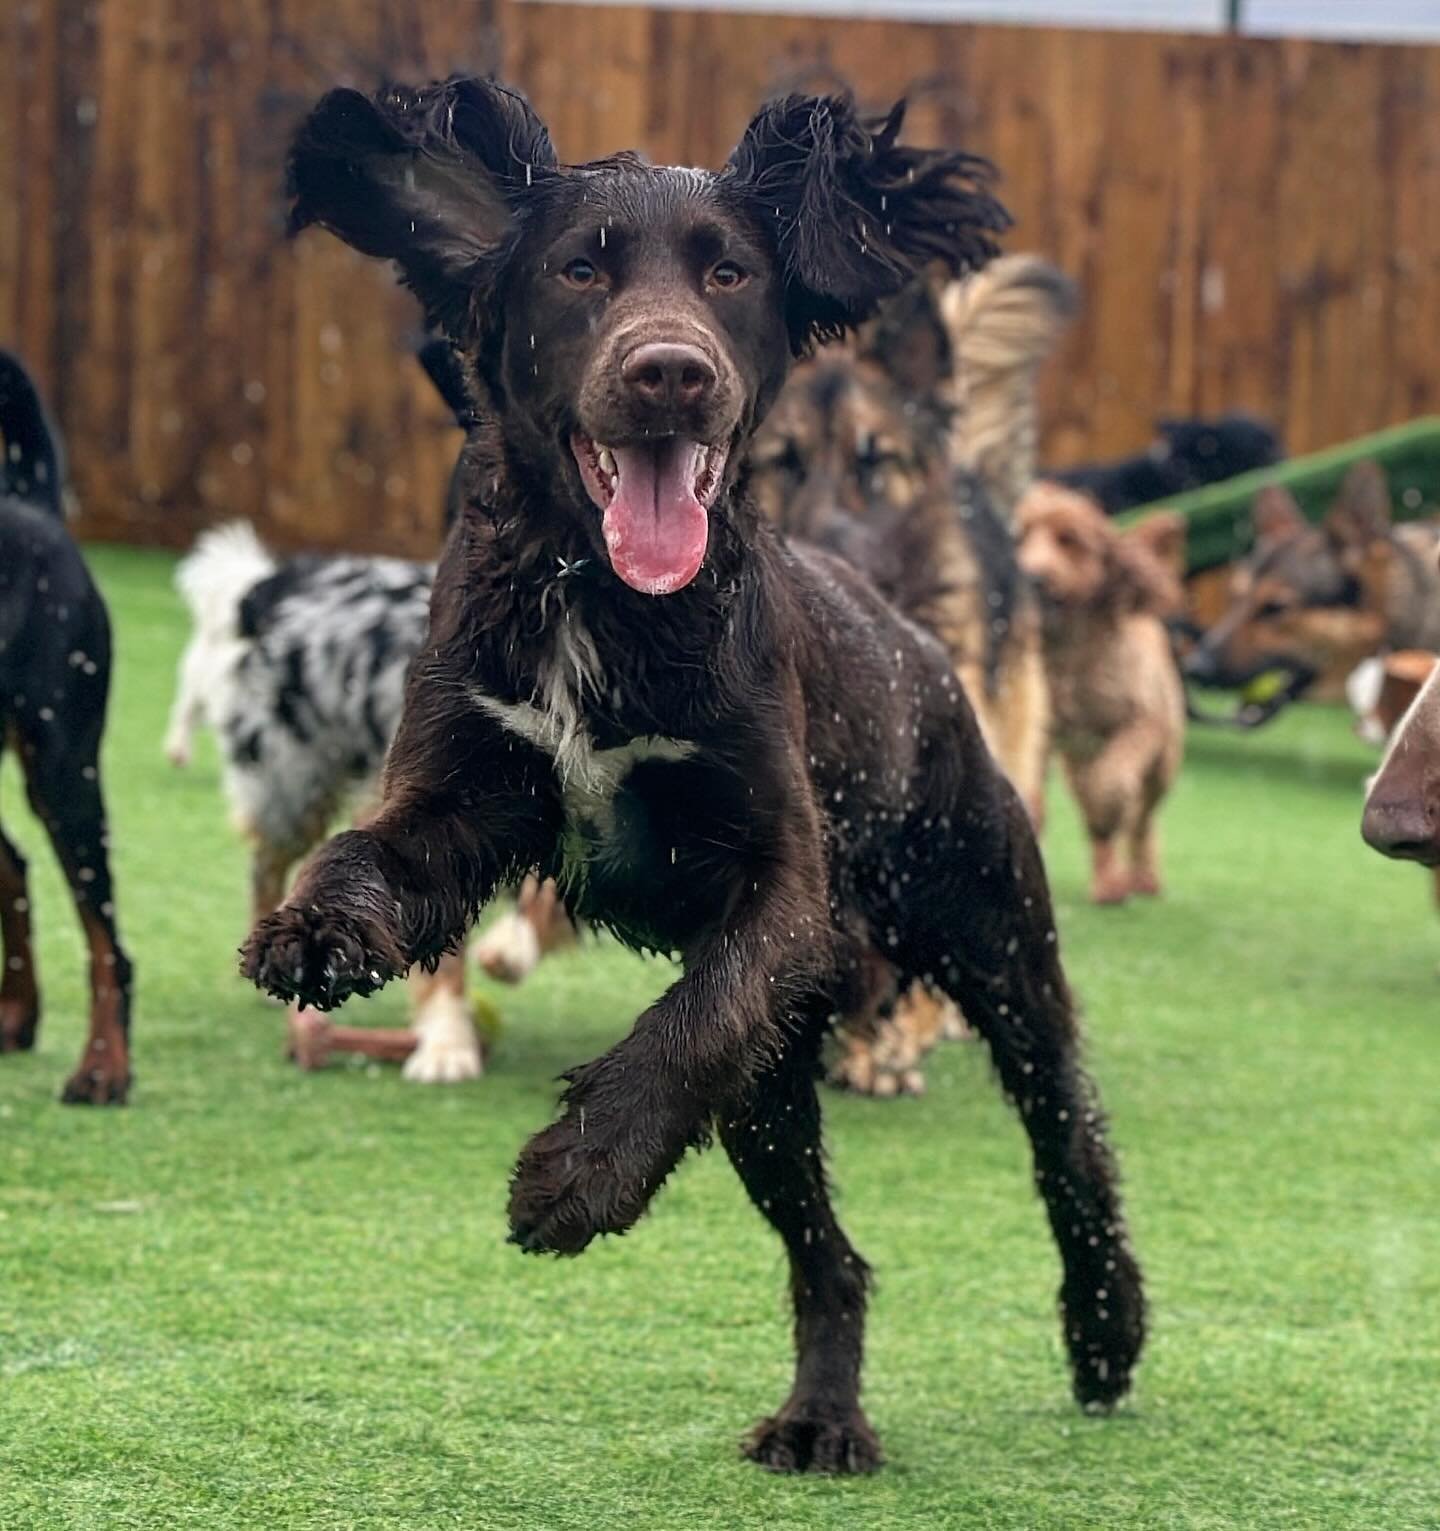 Hugo didn&rsquo;t care that it was raining nor that he was getting wet, he still loved every second at day care! Our day care is perfect for all weather conditions, vast indoor space including sofas, snug areas, play zones and more and a lovely clean